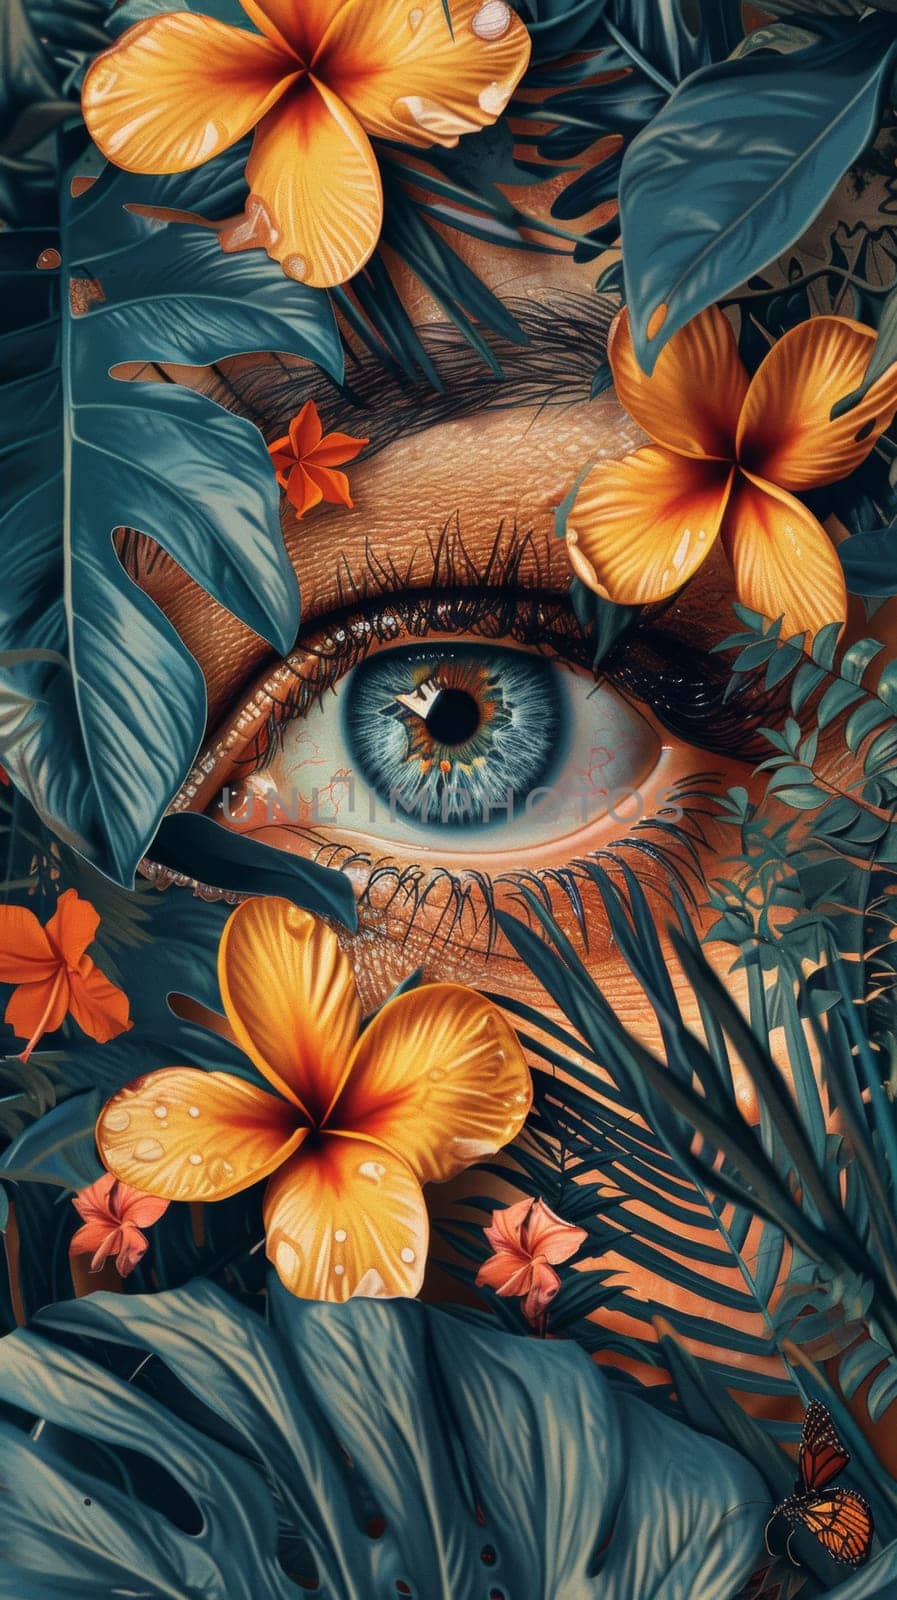 A close up of a woman's eye surrounded by tropical flowers